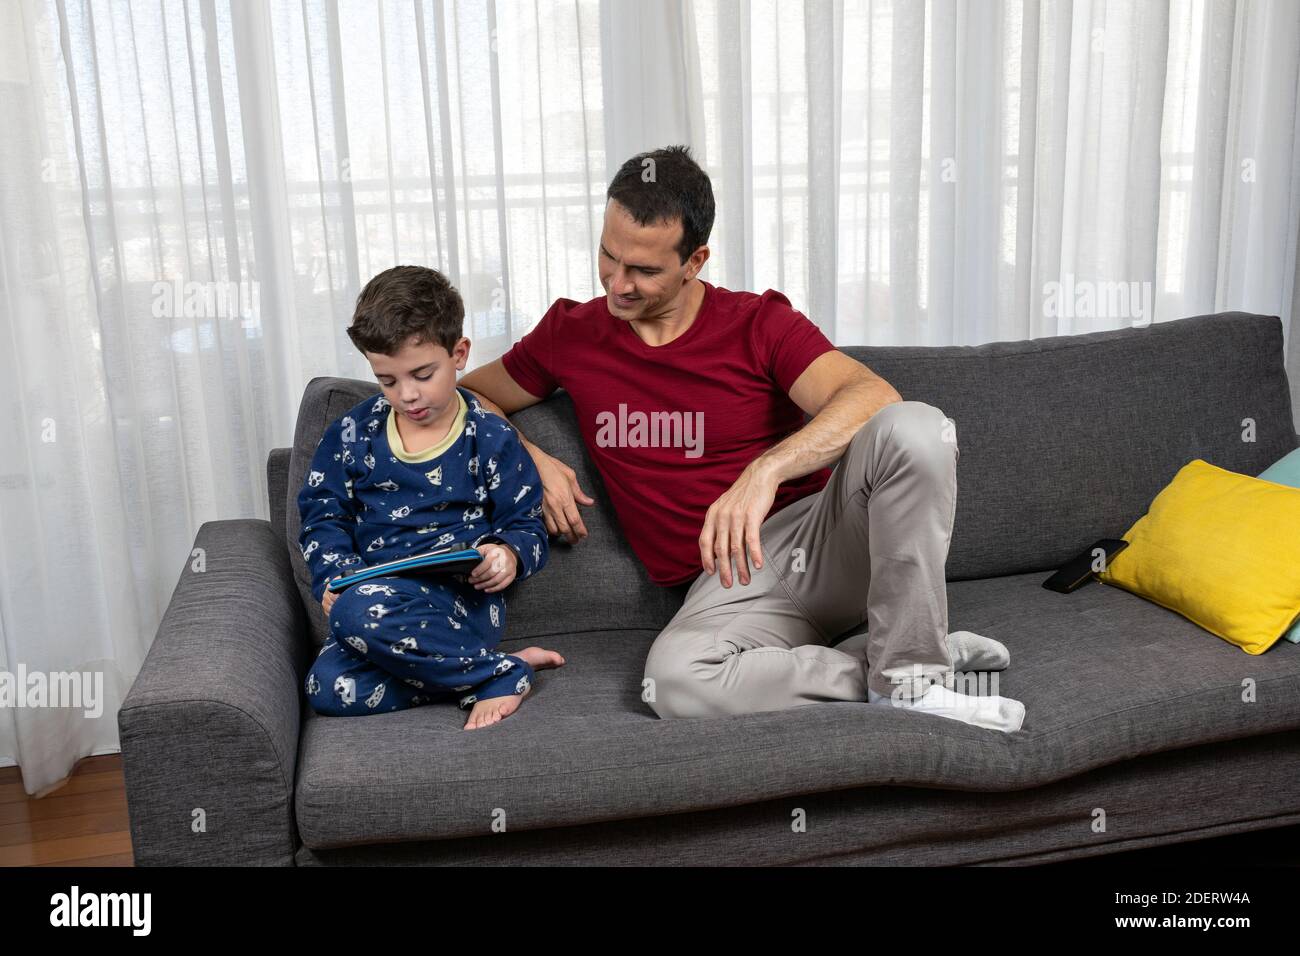 Mature man (44 years old) sitting next to his son (6 years old) and smiling at him. Stock Photo